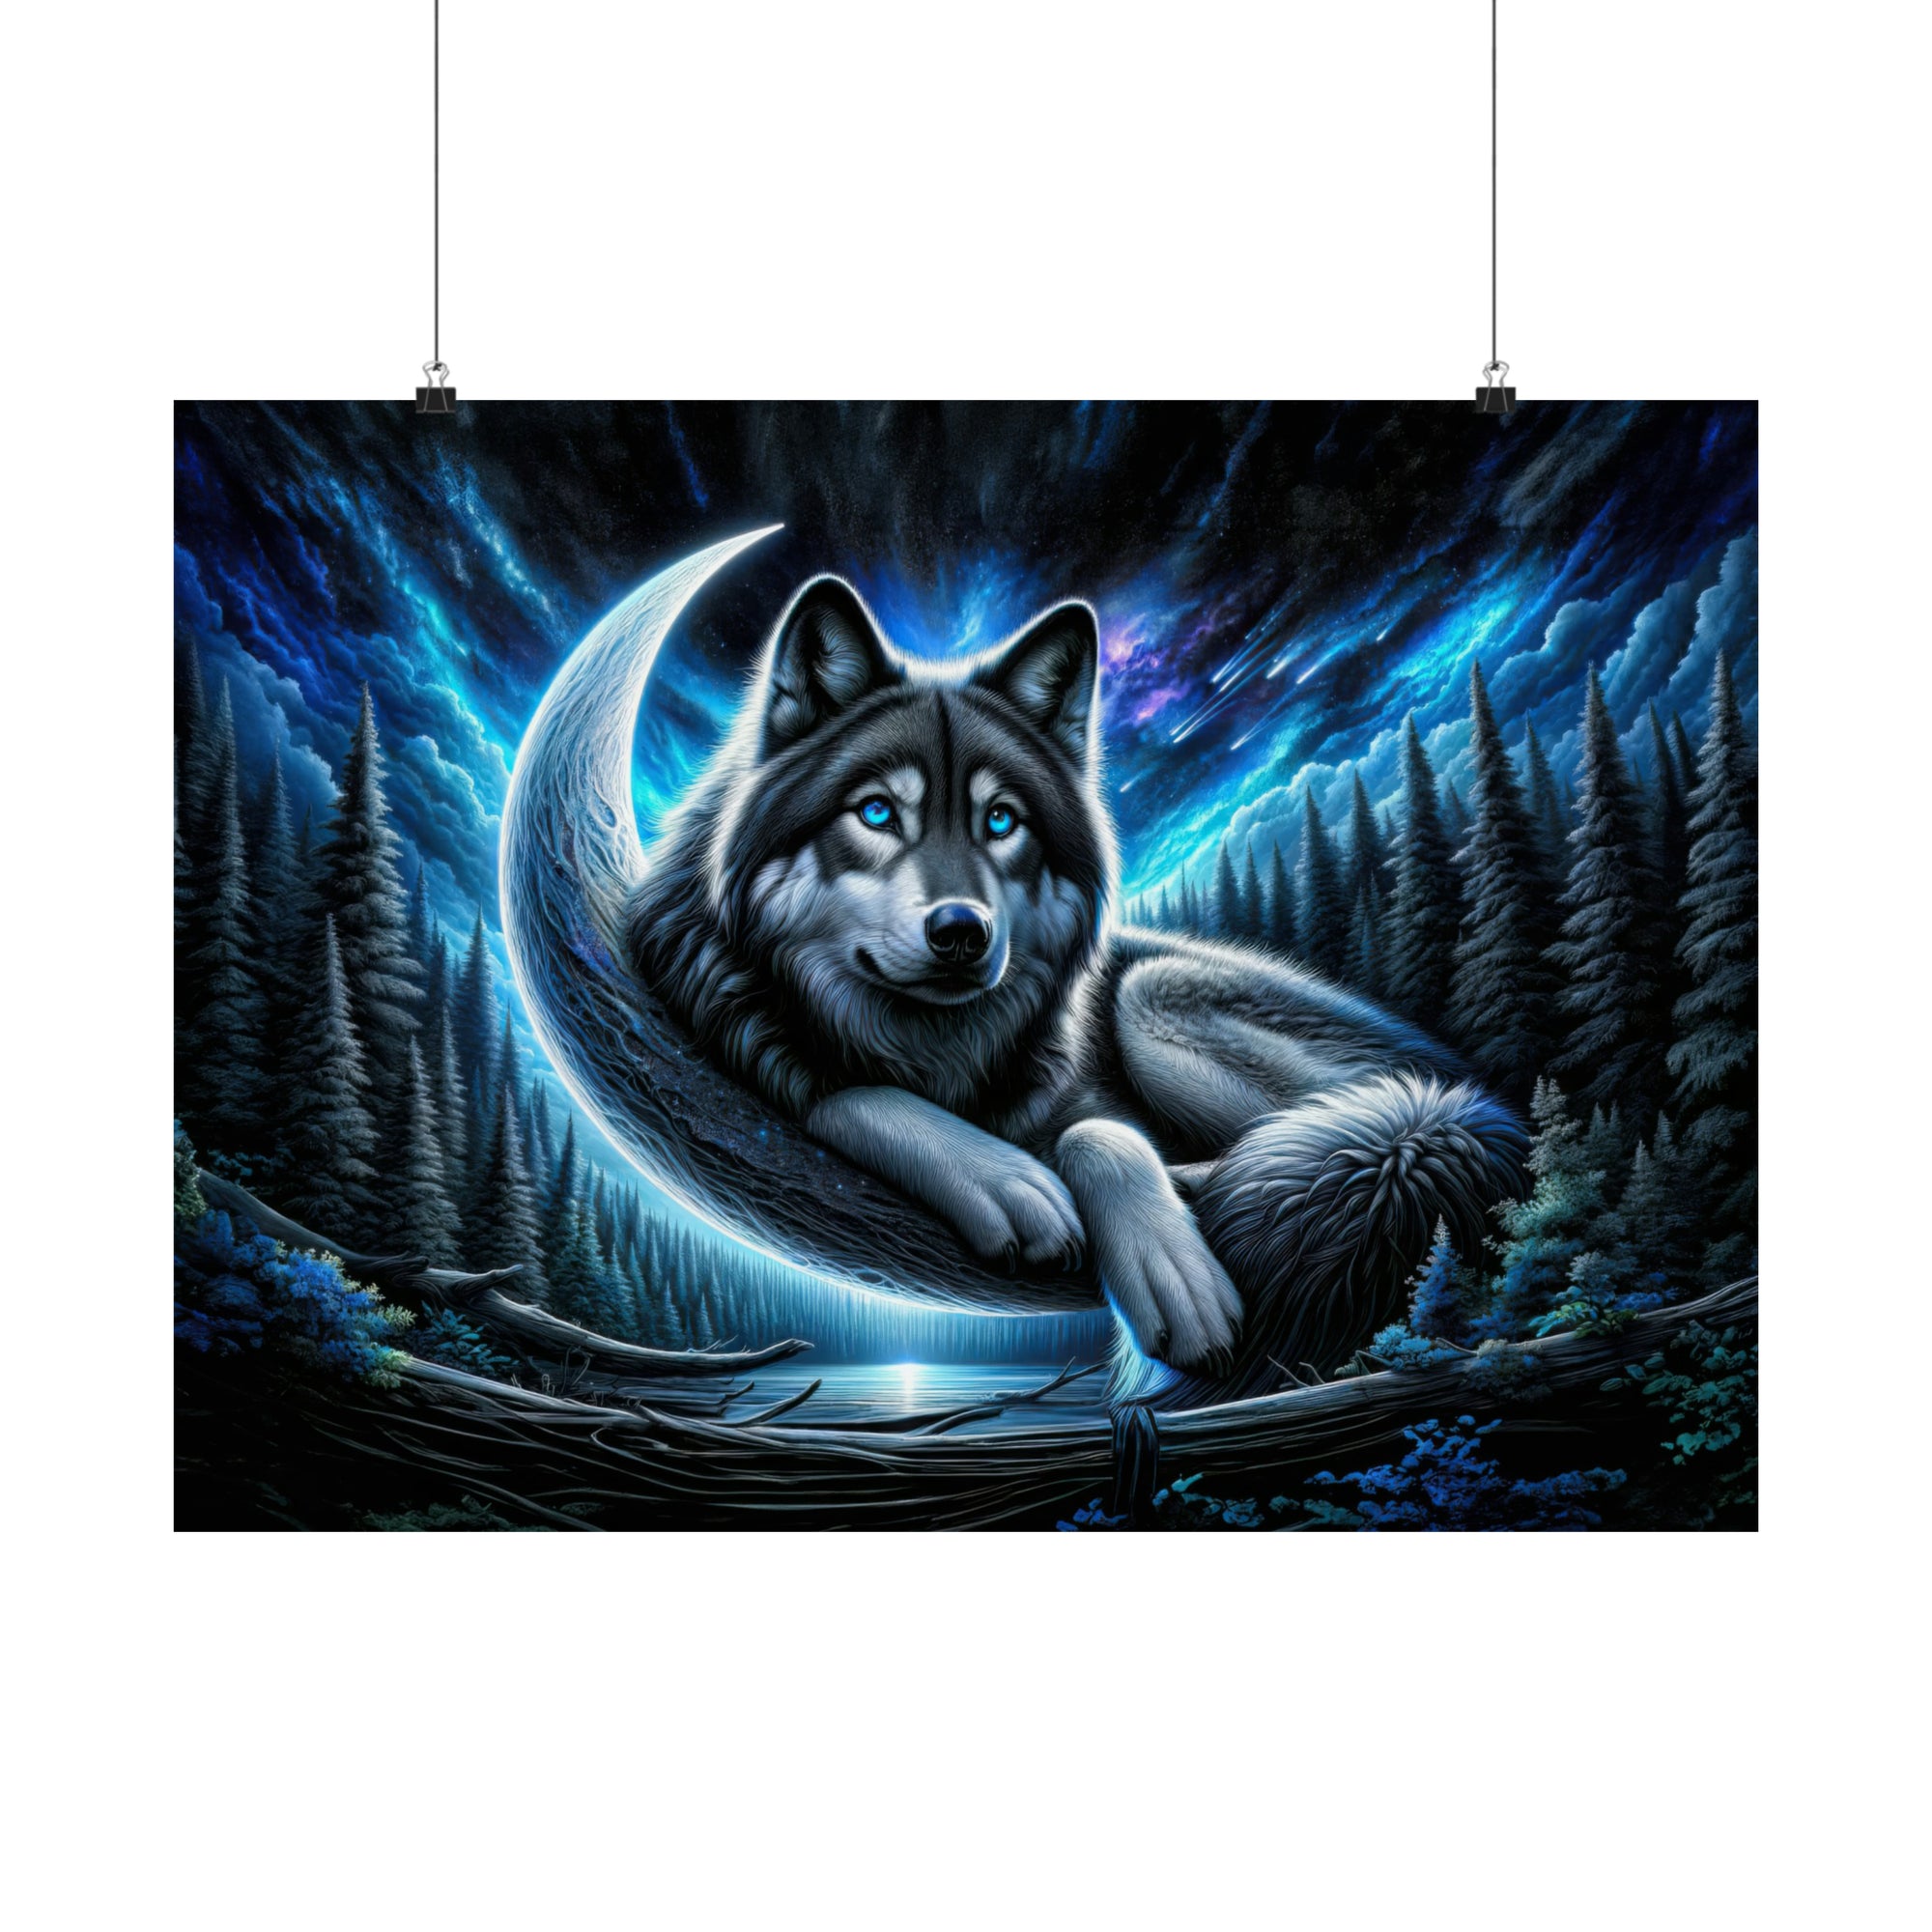 The Wolf's Cosmic Watch Poster